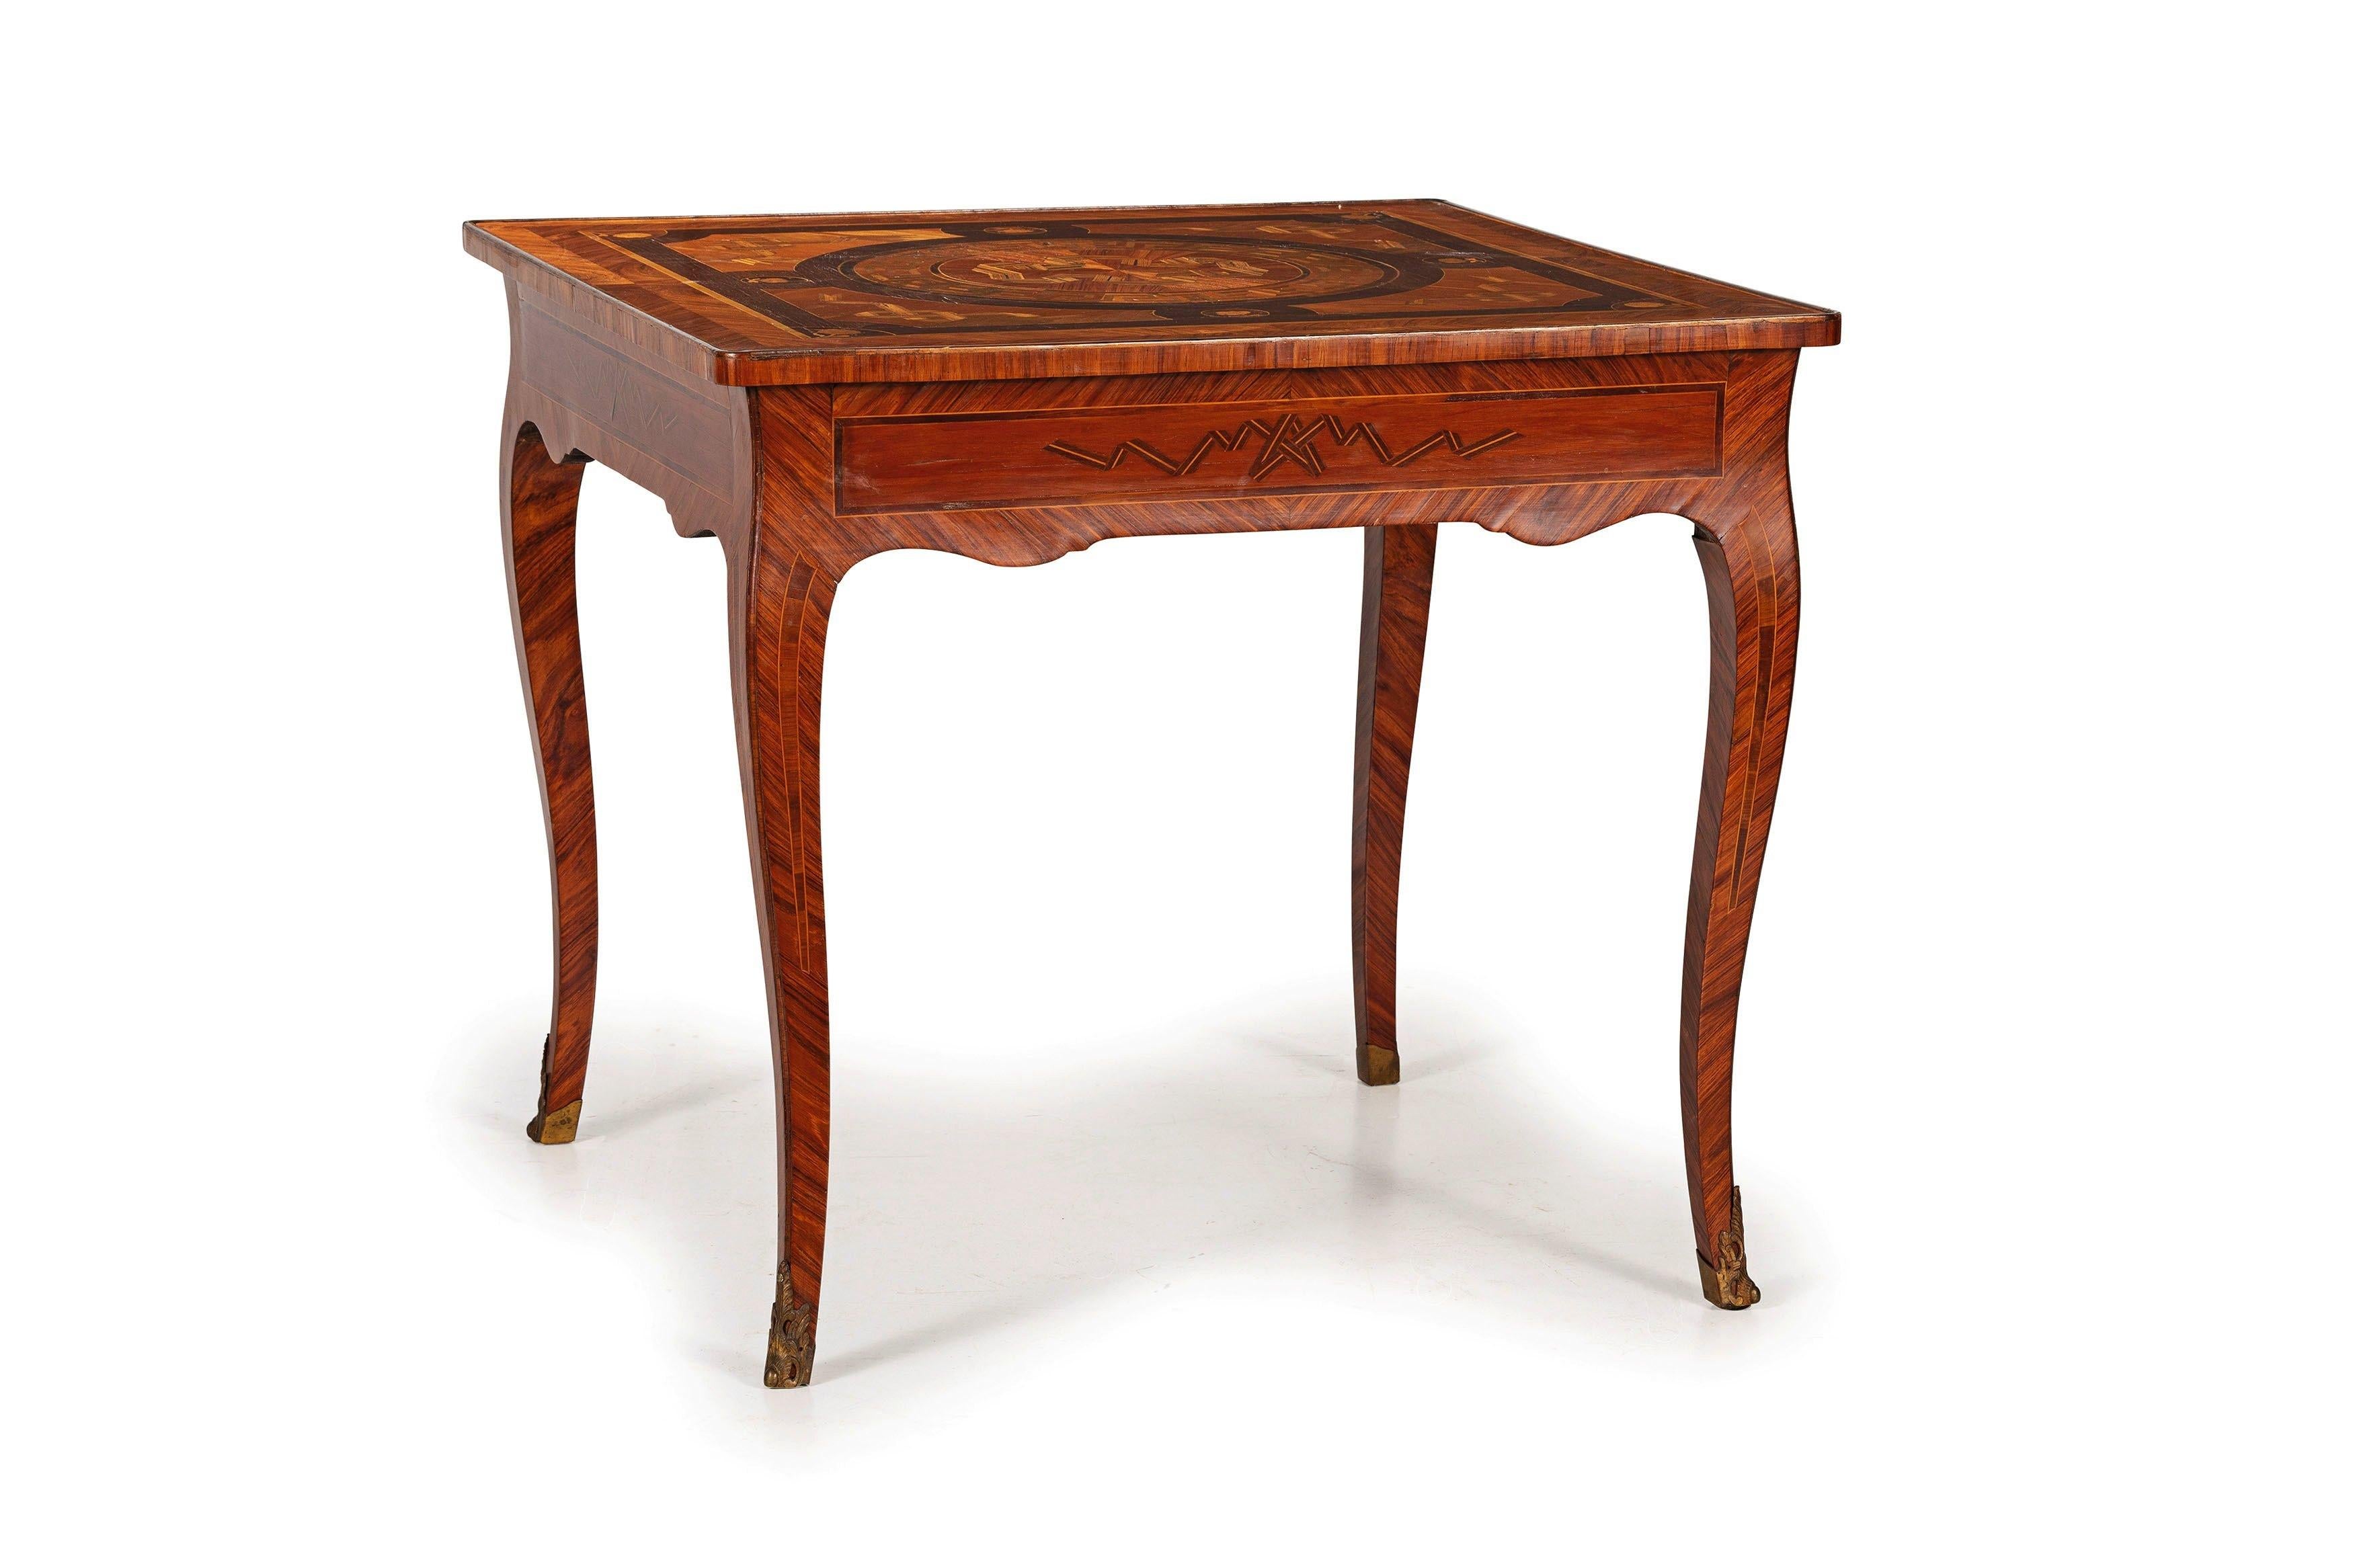 18th Century, Italian inlaid wood center table.
This refined centre table, finished on all four sides, was made in Italy in the 18th century, in veneered and inlaid wood with various wood essences, including bois de rose, rosewood, boxwood and